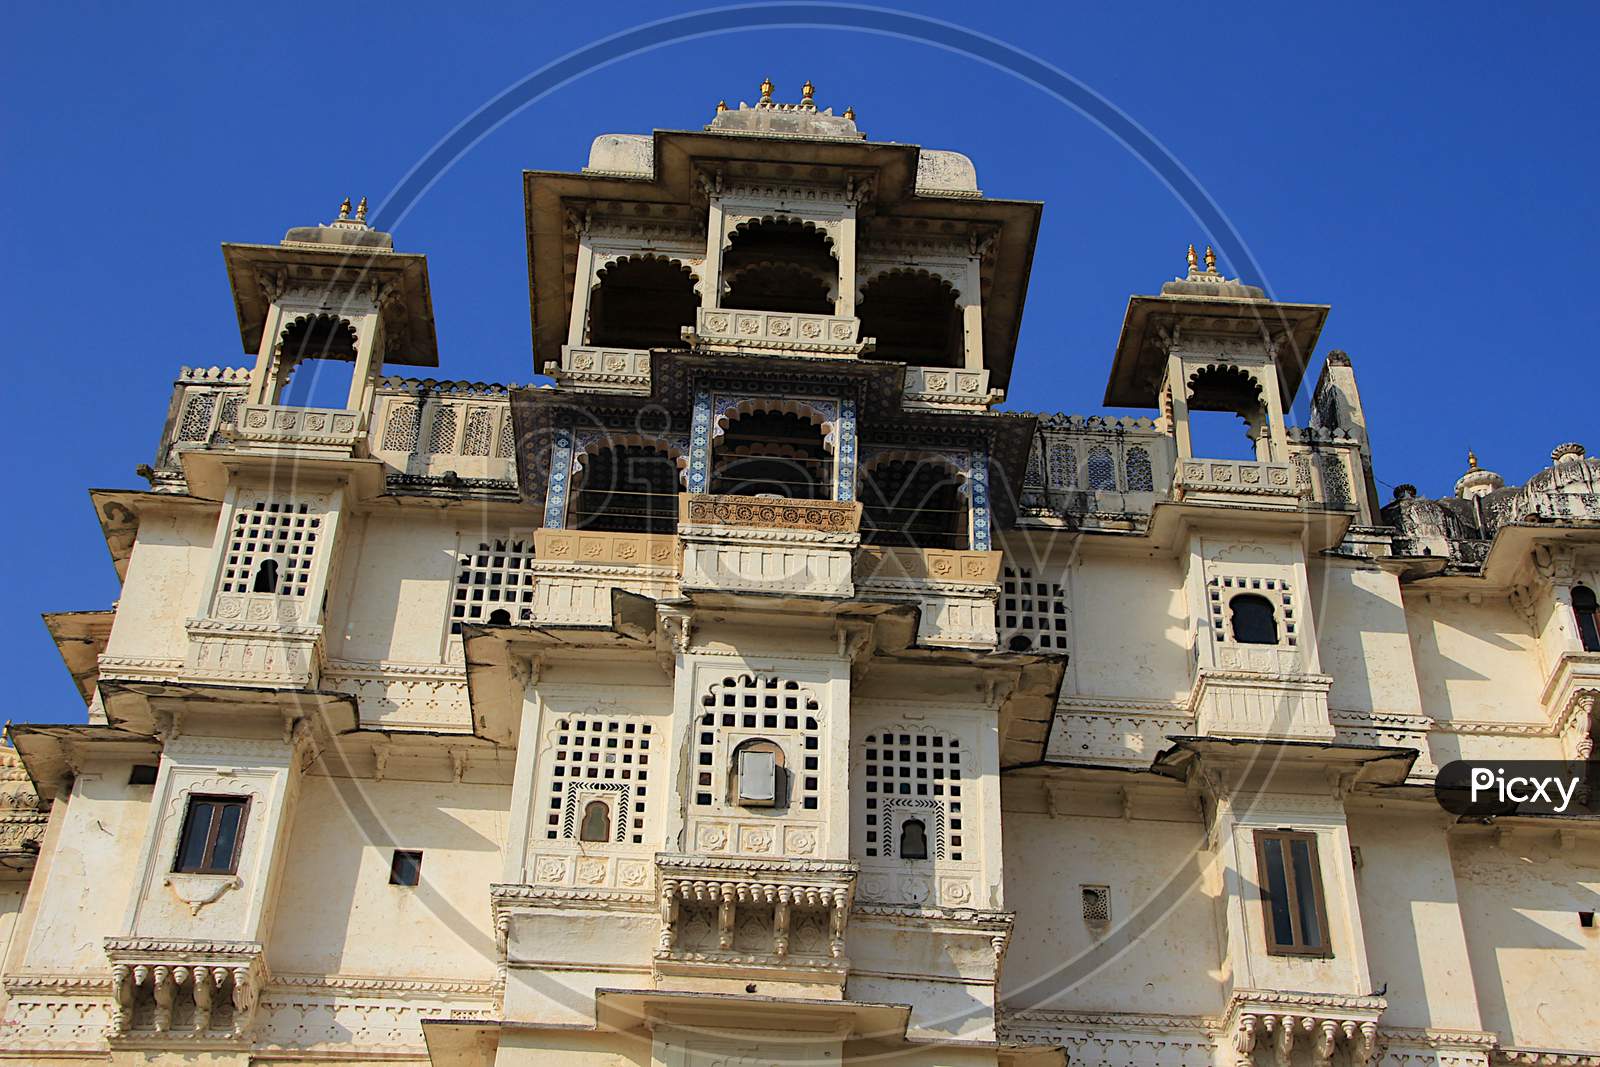 Frontage Of City Palace, Udaipur